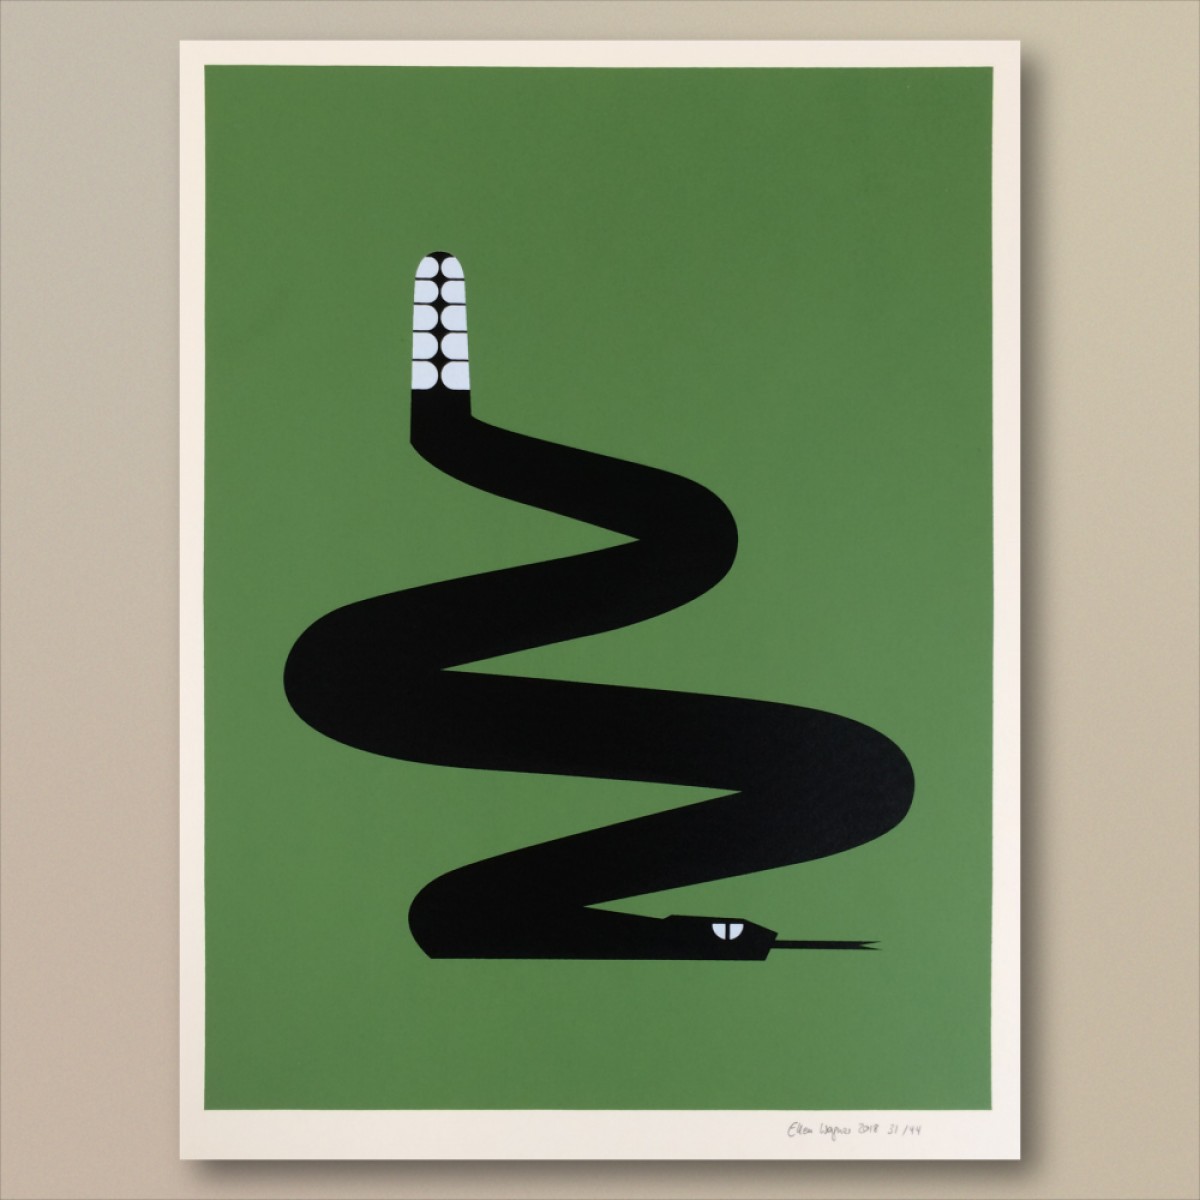 Print now - Riot later ● Abstract Snake Siebdruck